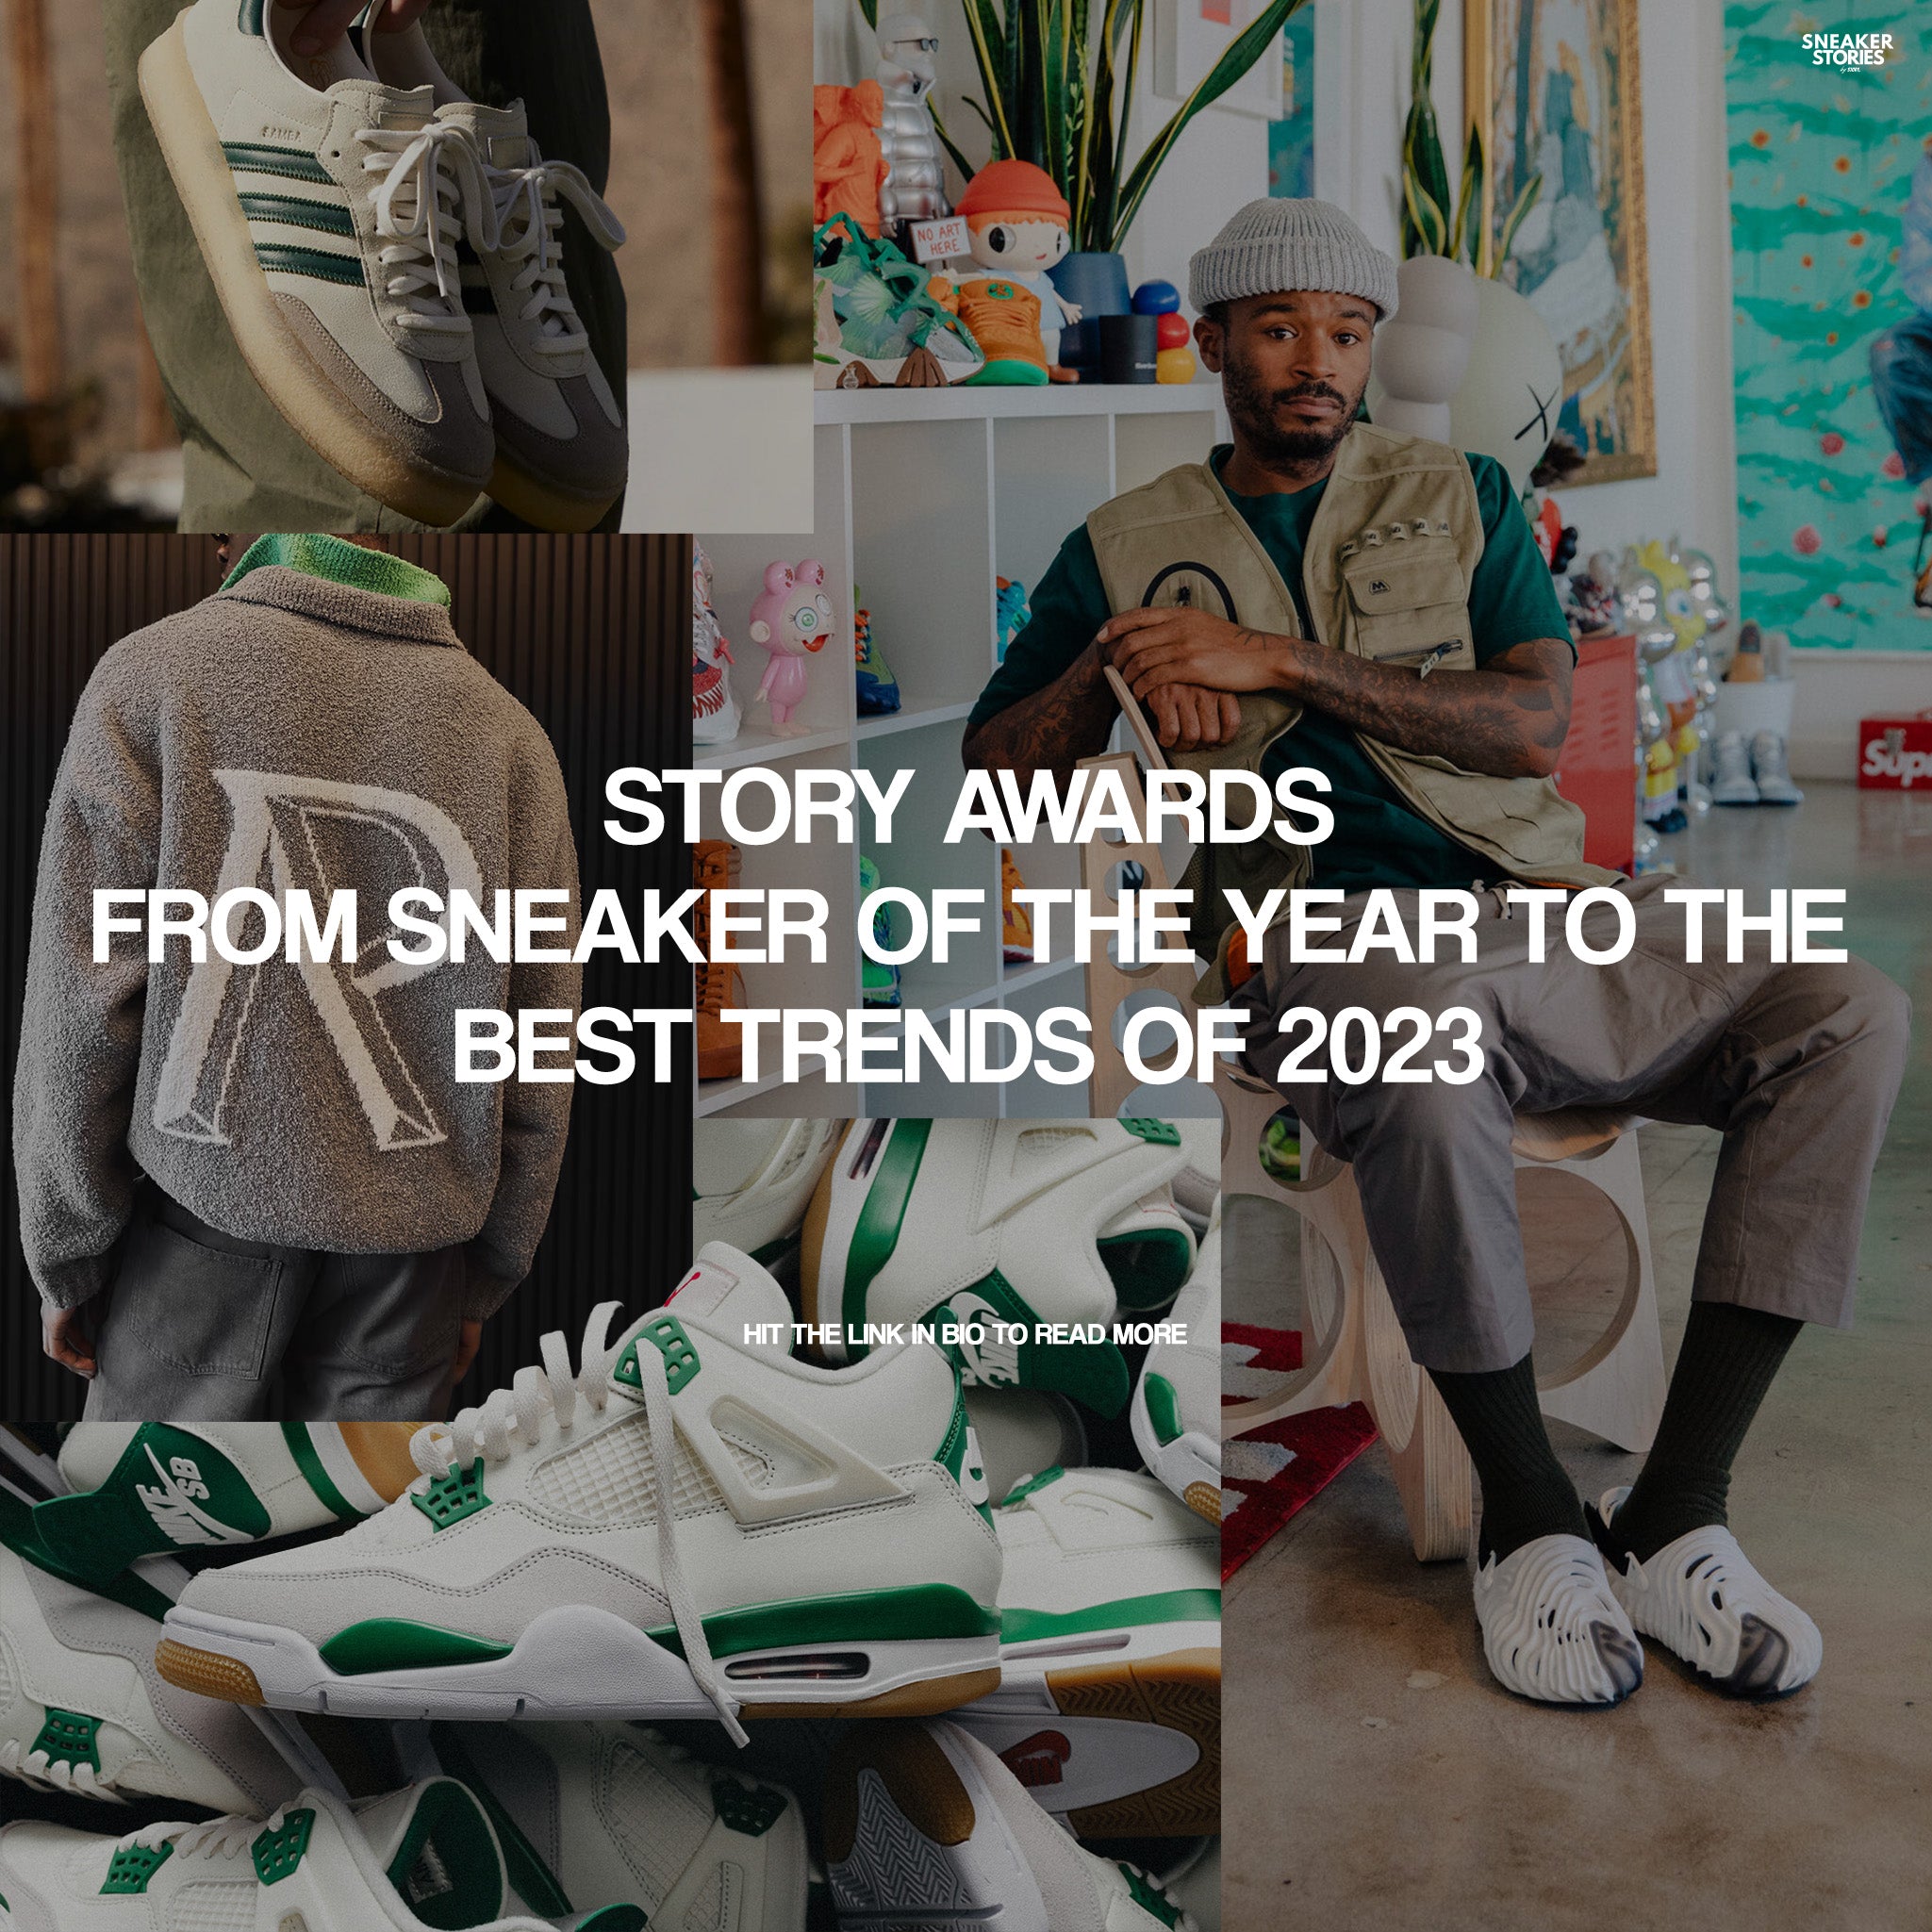 Story Awards From sneaker of the year to the best trends of 2023